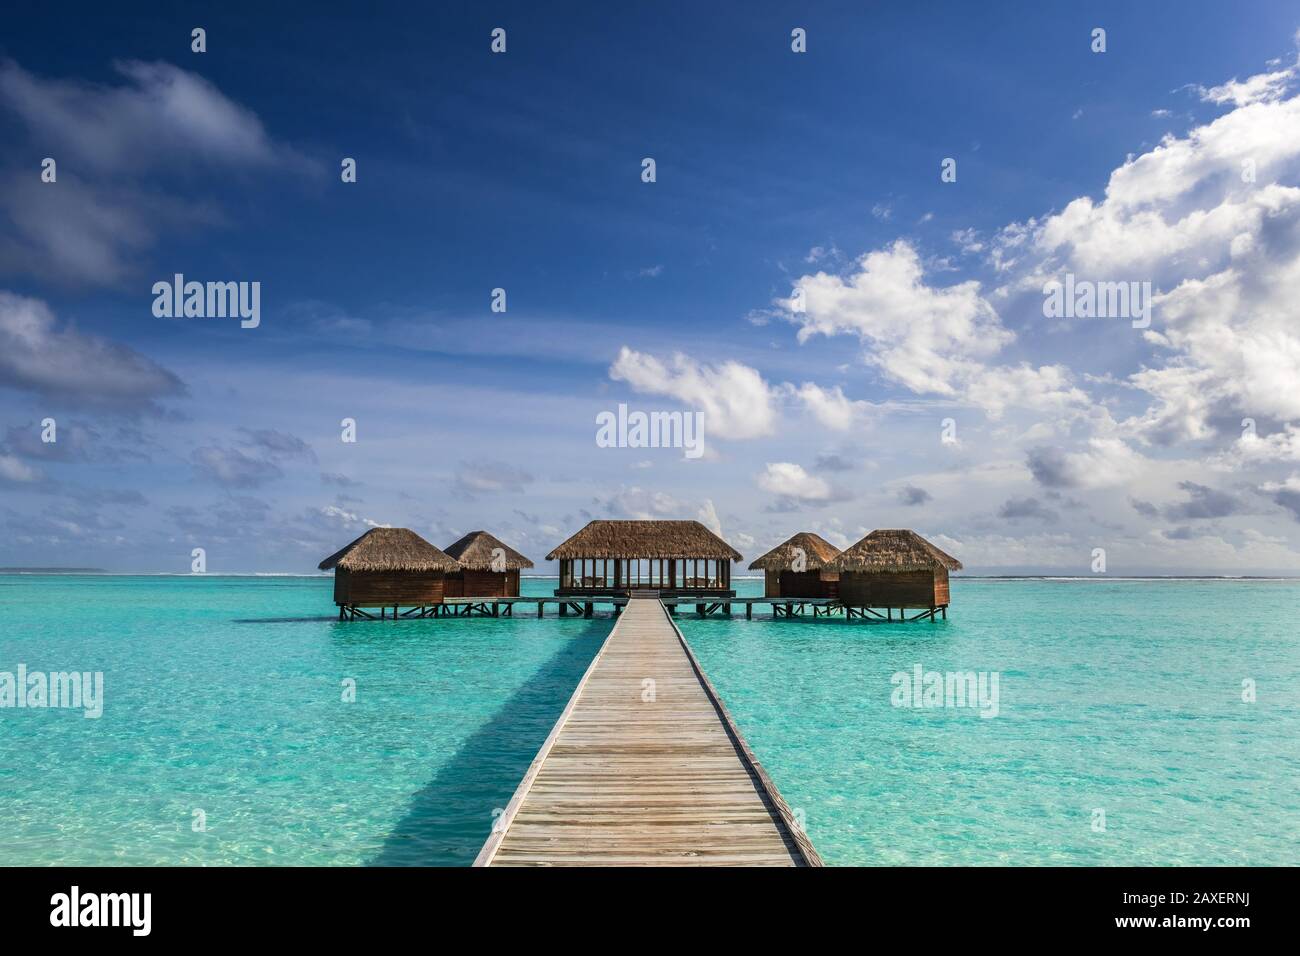 A stunning over-water spa at the Conrad by Hilton hotel, with room for text, in the Maldives Stock Photo